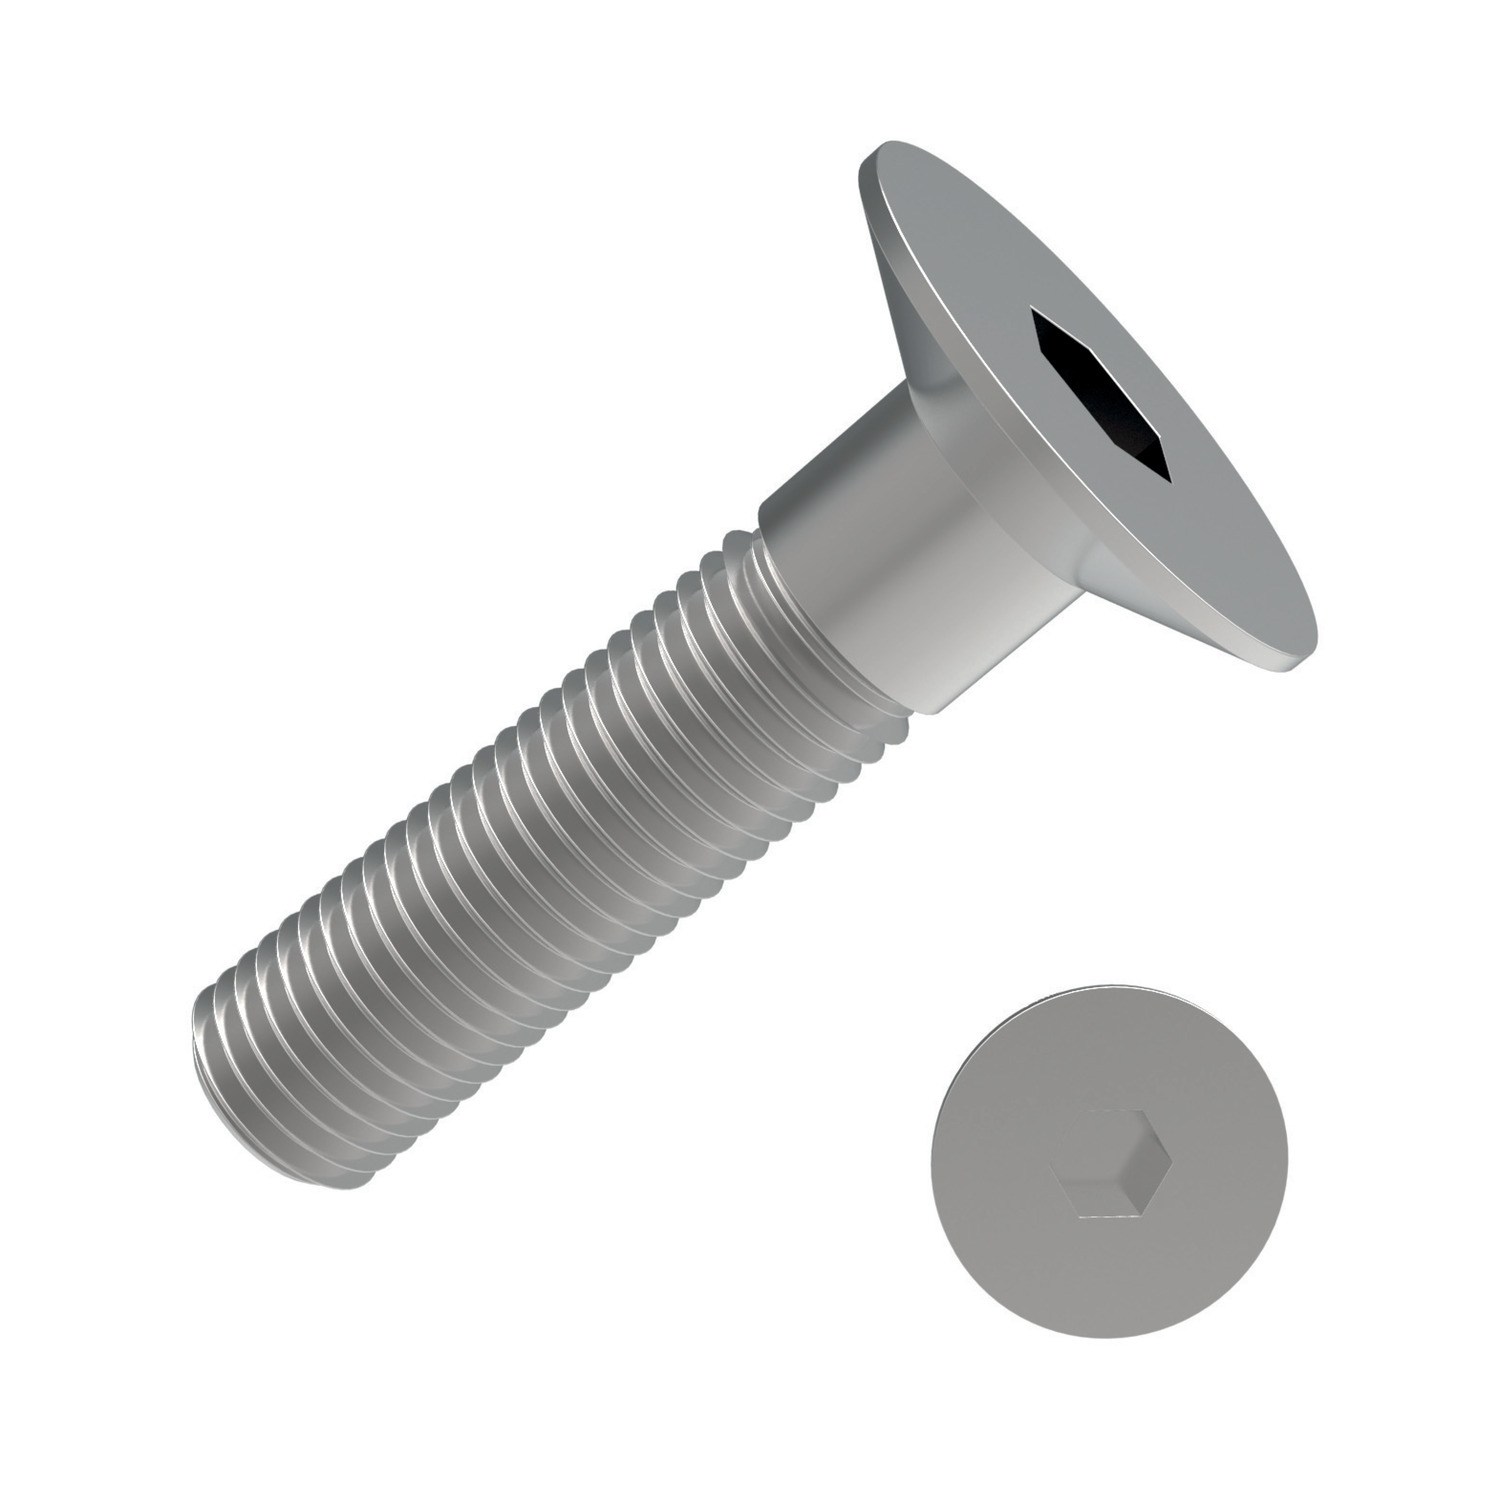 Socket Countersunk Machine Screws Zinc plated. For longer length screws the threaded portion l21. To DIN 7991, ISO 10642.